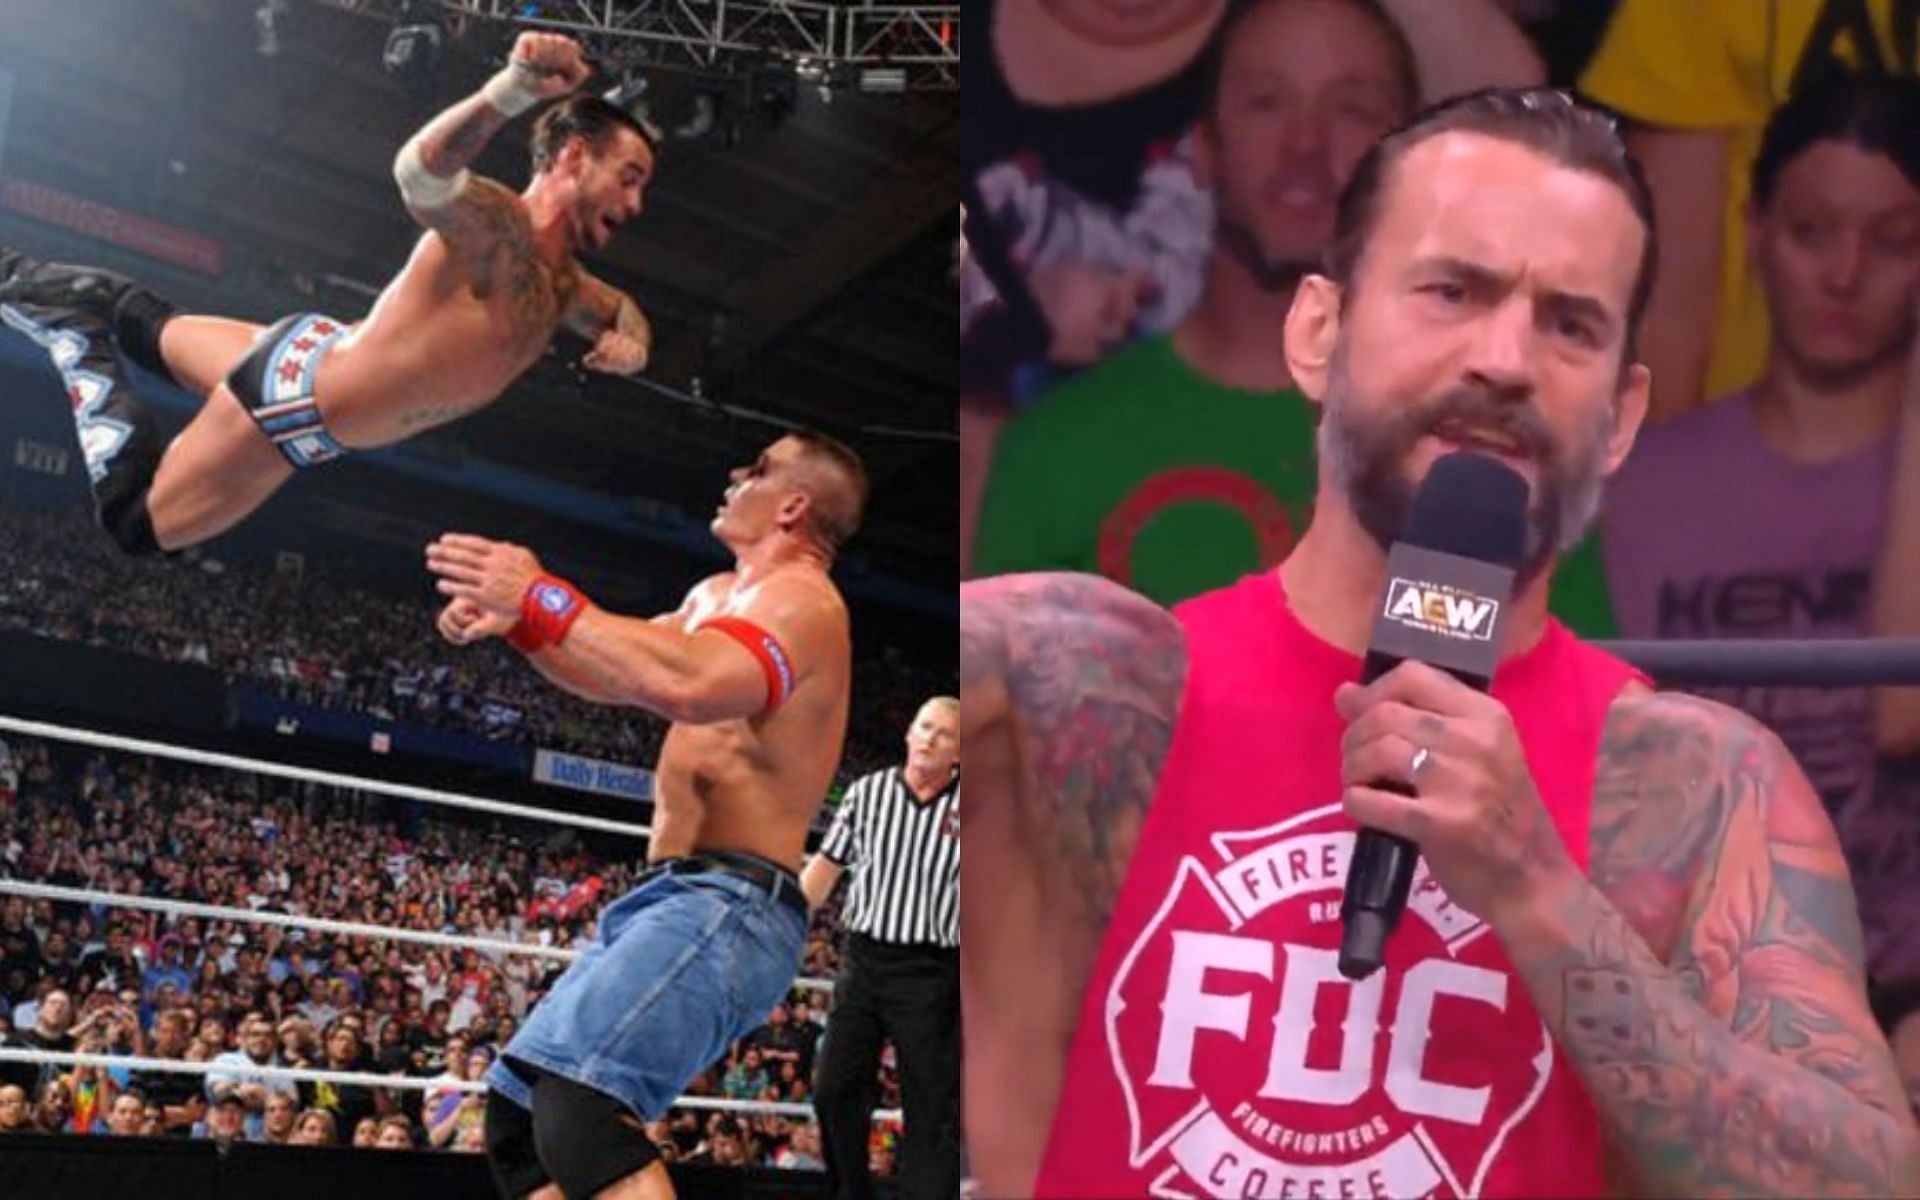 CM Punk and John Cena had an iconic rivalry in the WWE from 2011 to 2013.